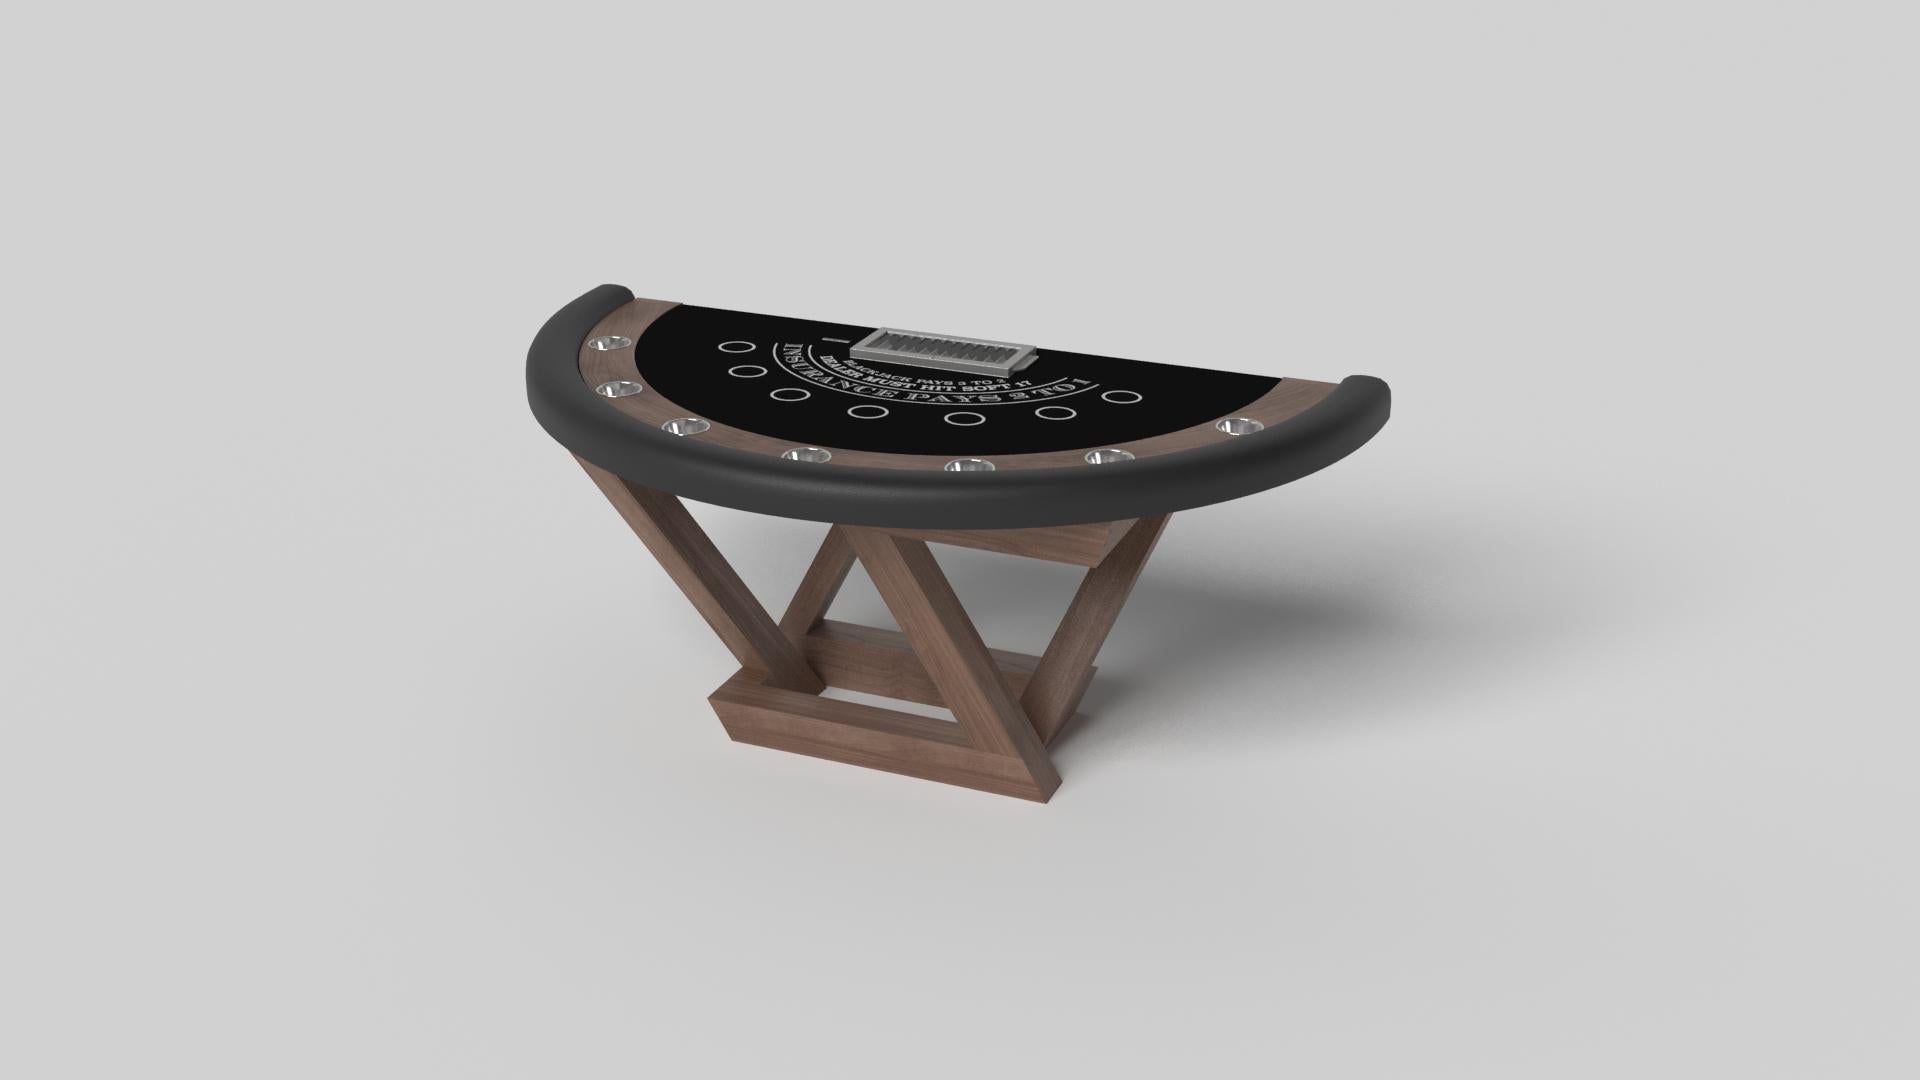 A contemporary composition of clean lines and sleek edges, the Trinity blackjack table in Black is an elegant expression of modern design. Handcrafted in a semicircular design with a chip rack and betting circles, this table offers statement-making